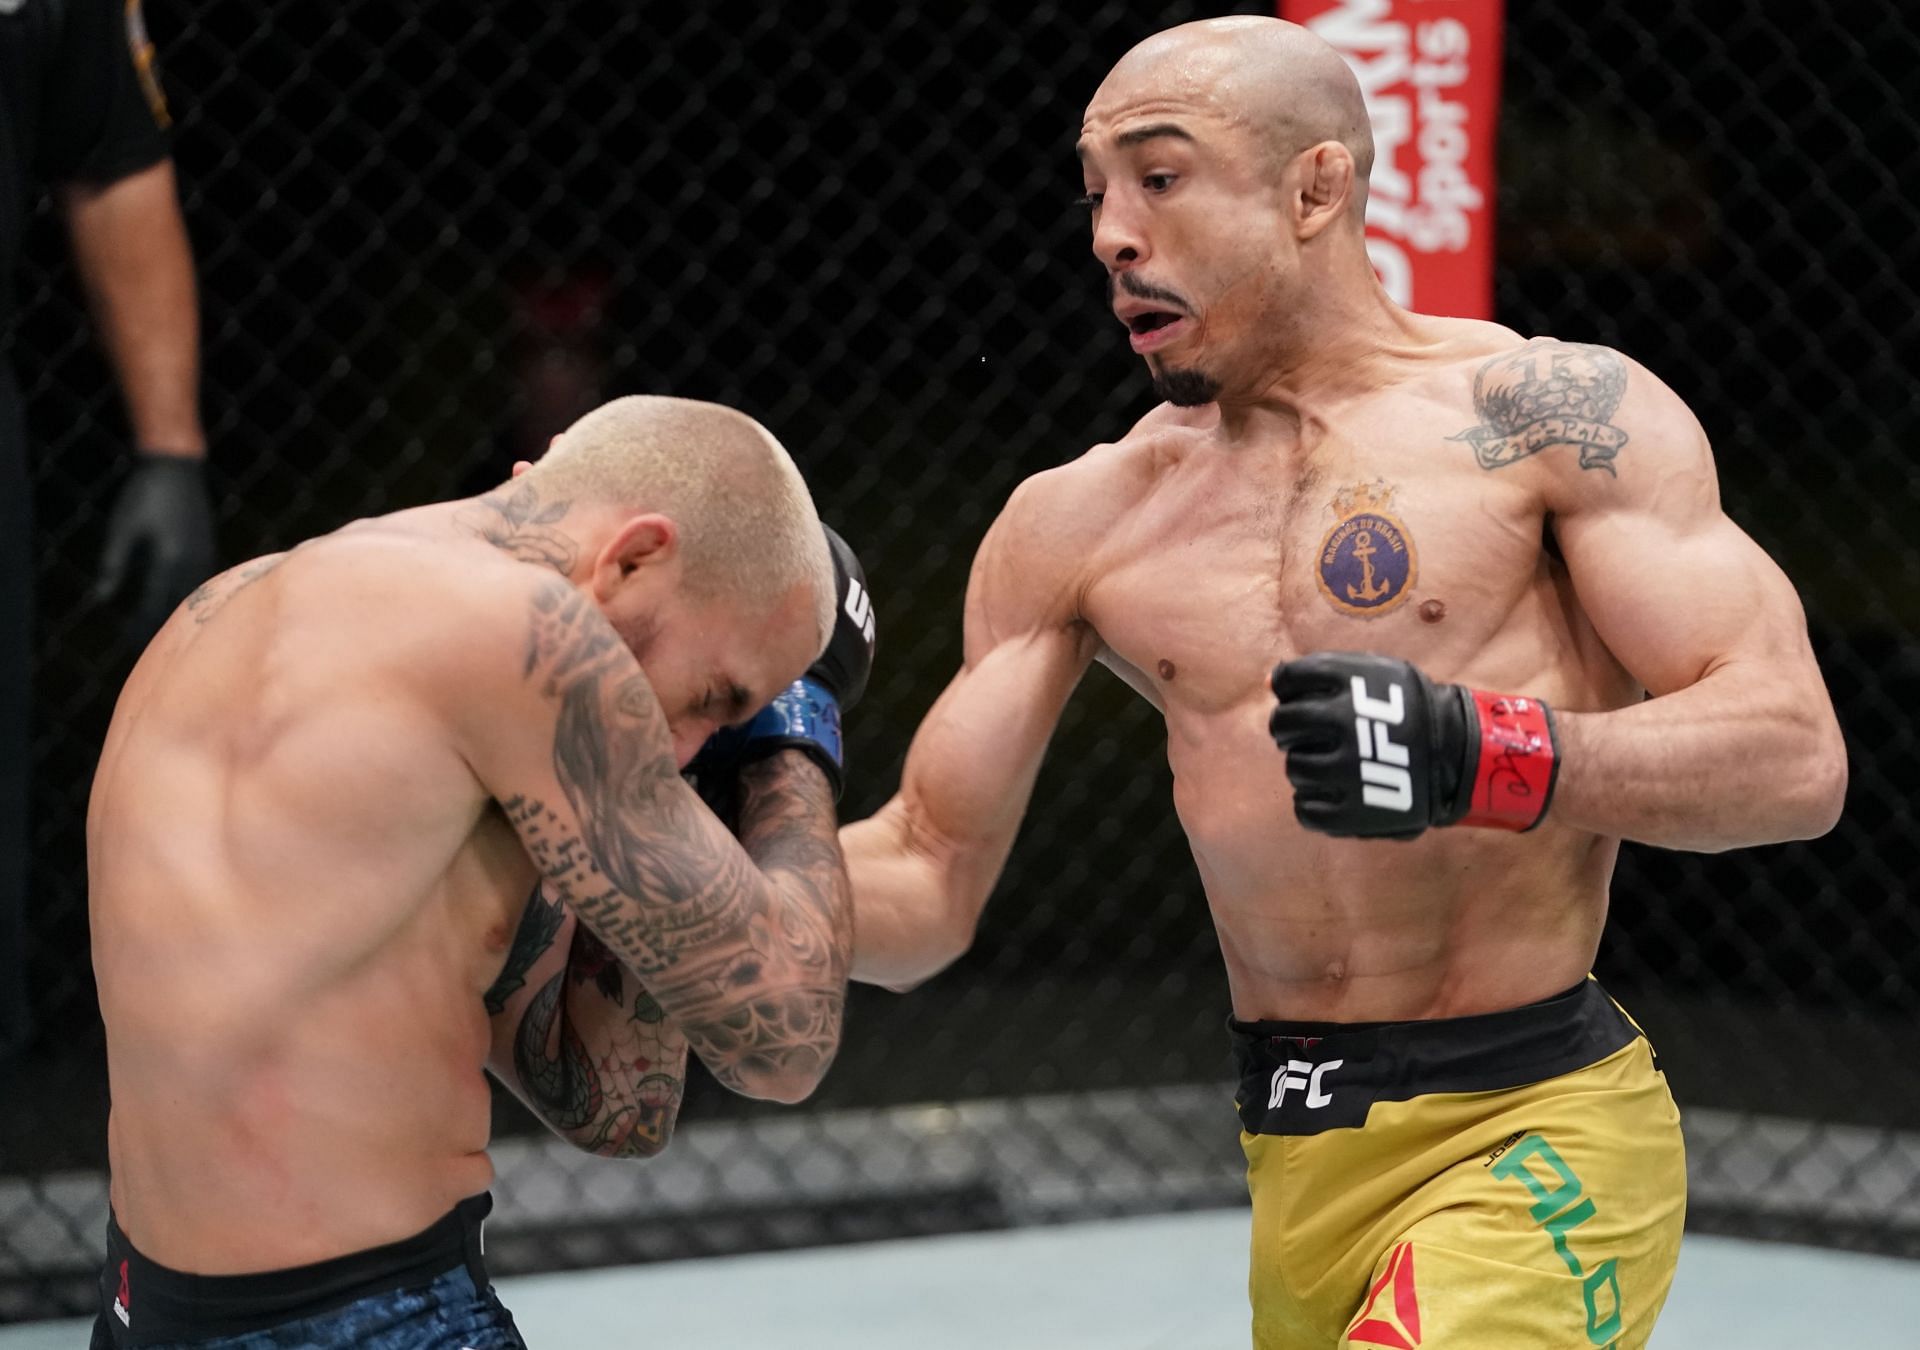 Former UFC featherweight champ Jose Aldo has nothing left to prove in the octagon